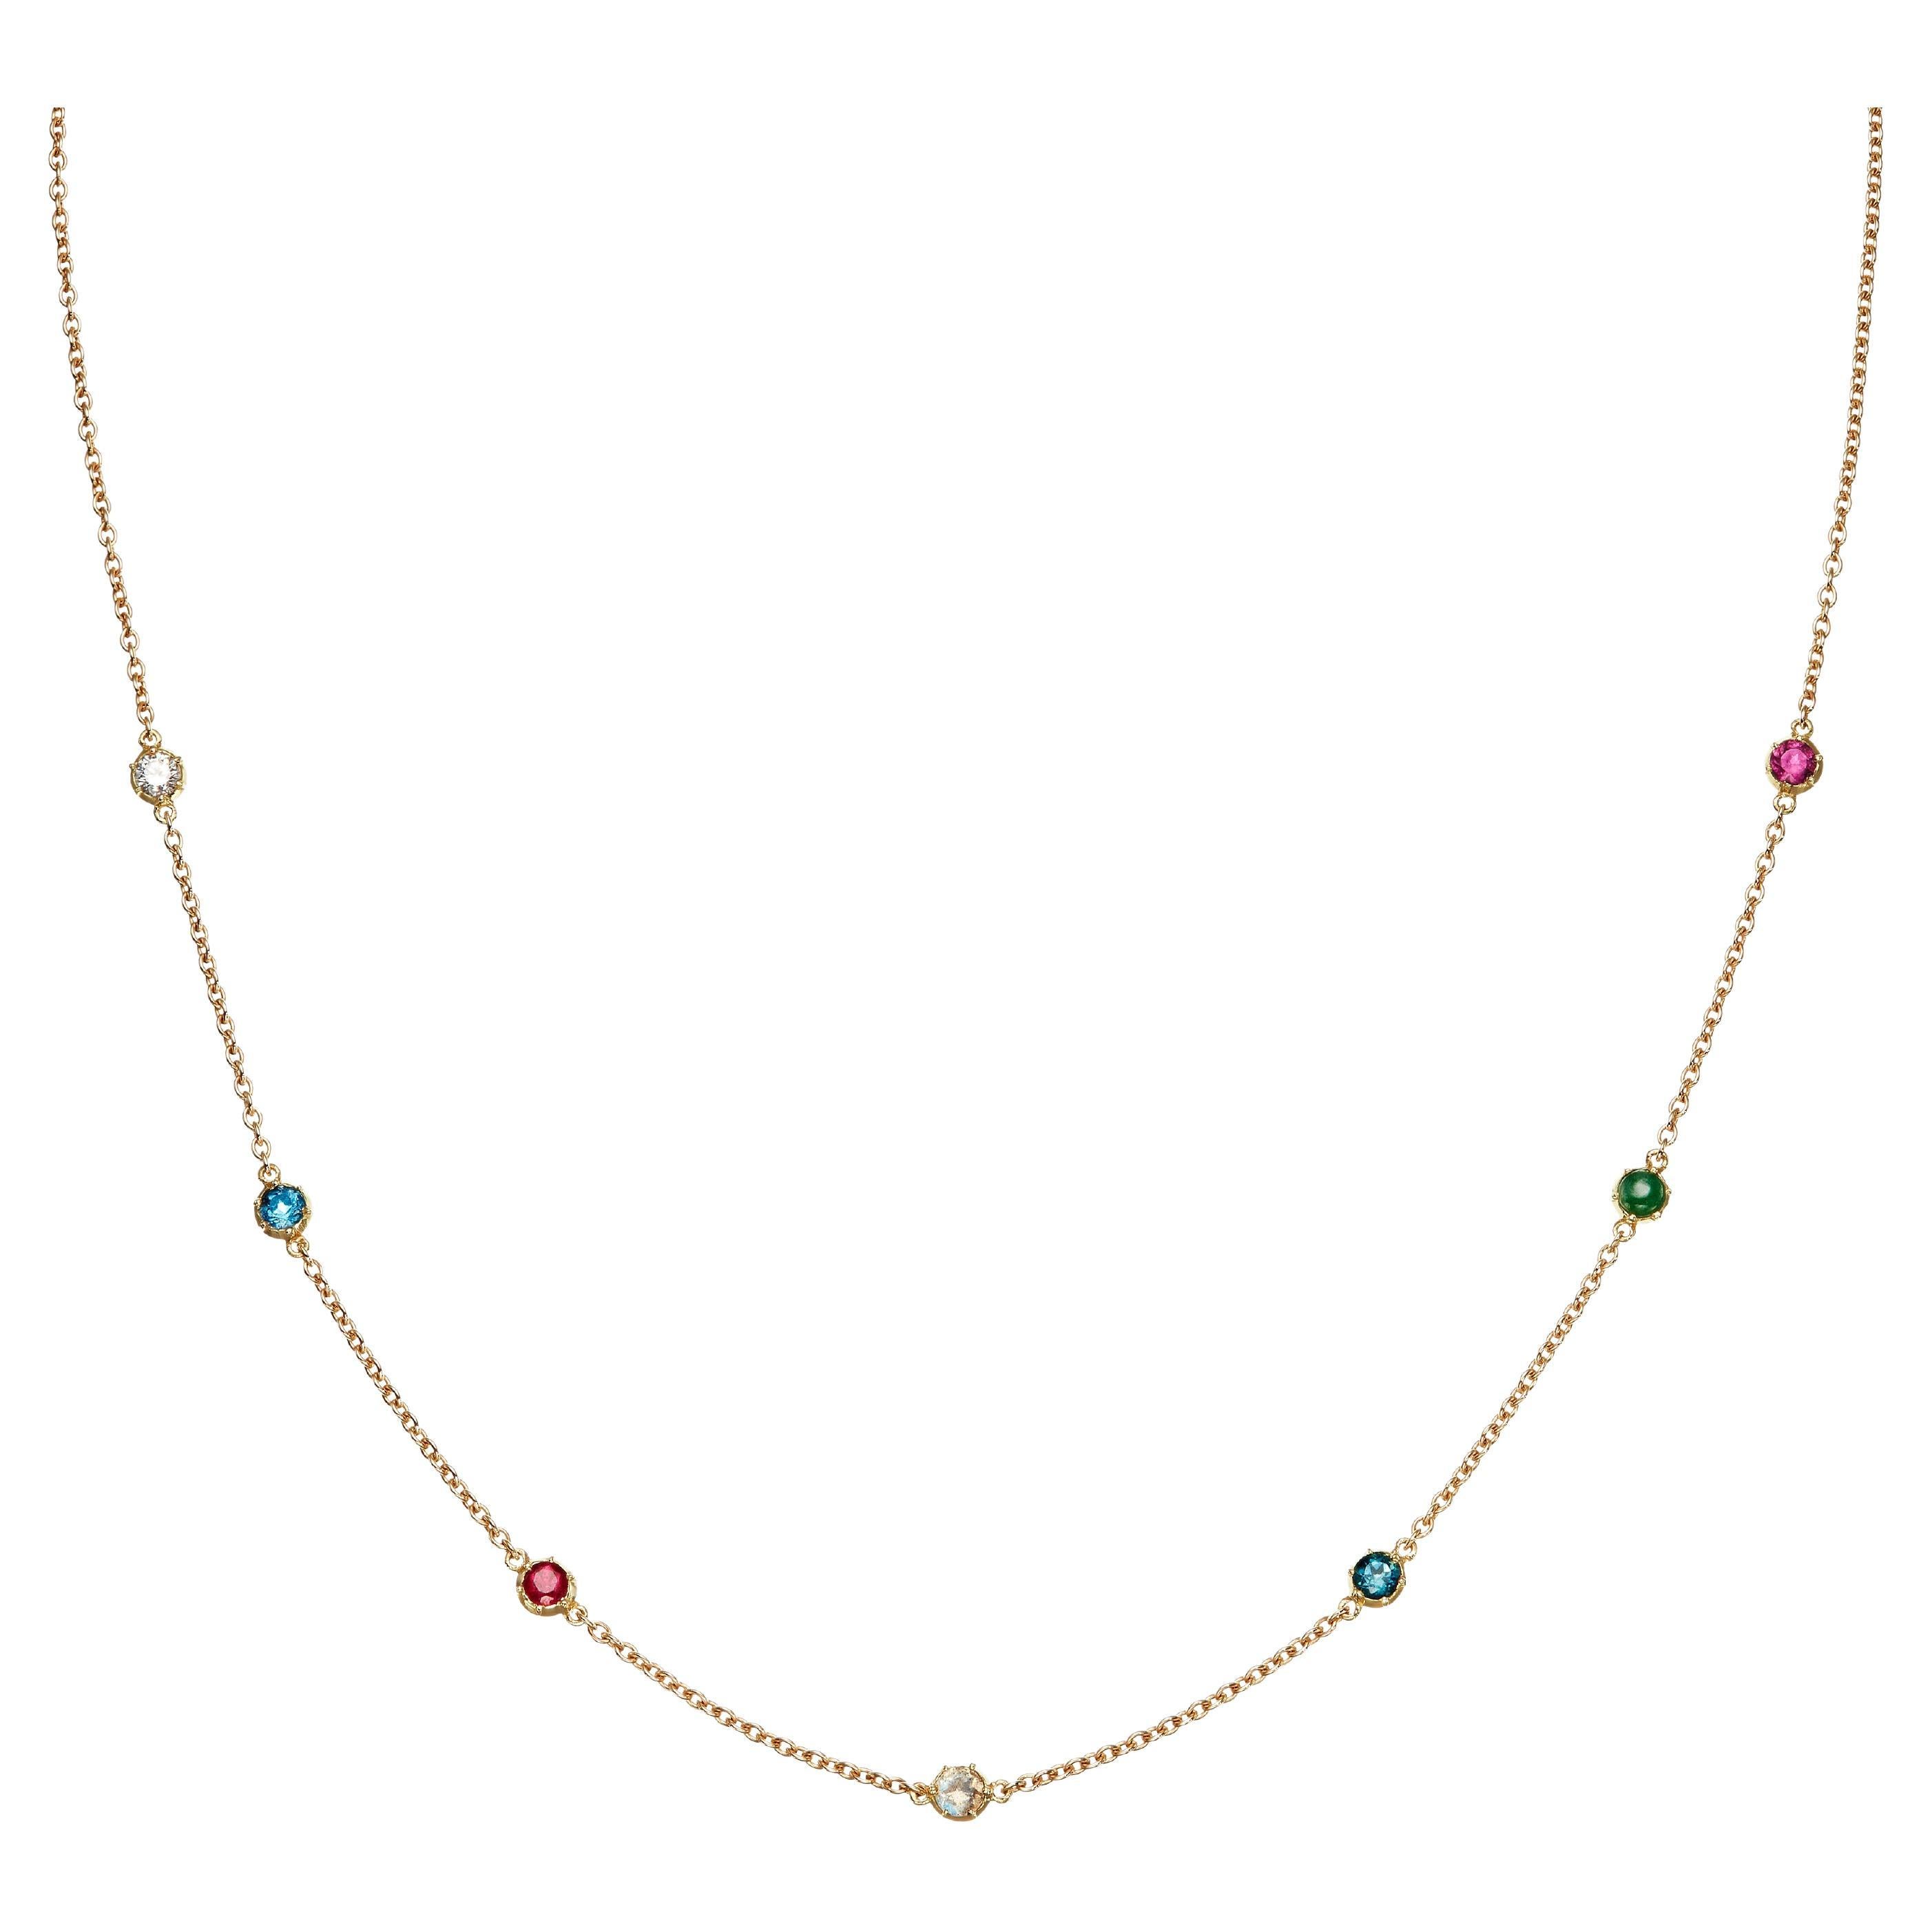 Antique Inspired Multi Gem Acrostic Yellow Gold "Darling" Chain Necklace For Sale